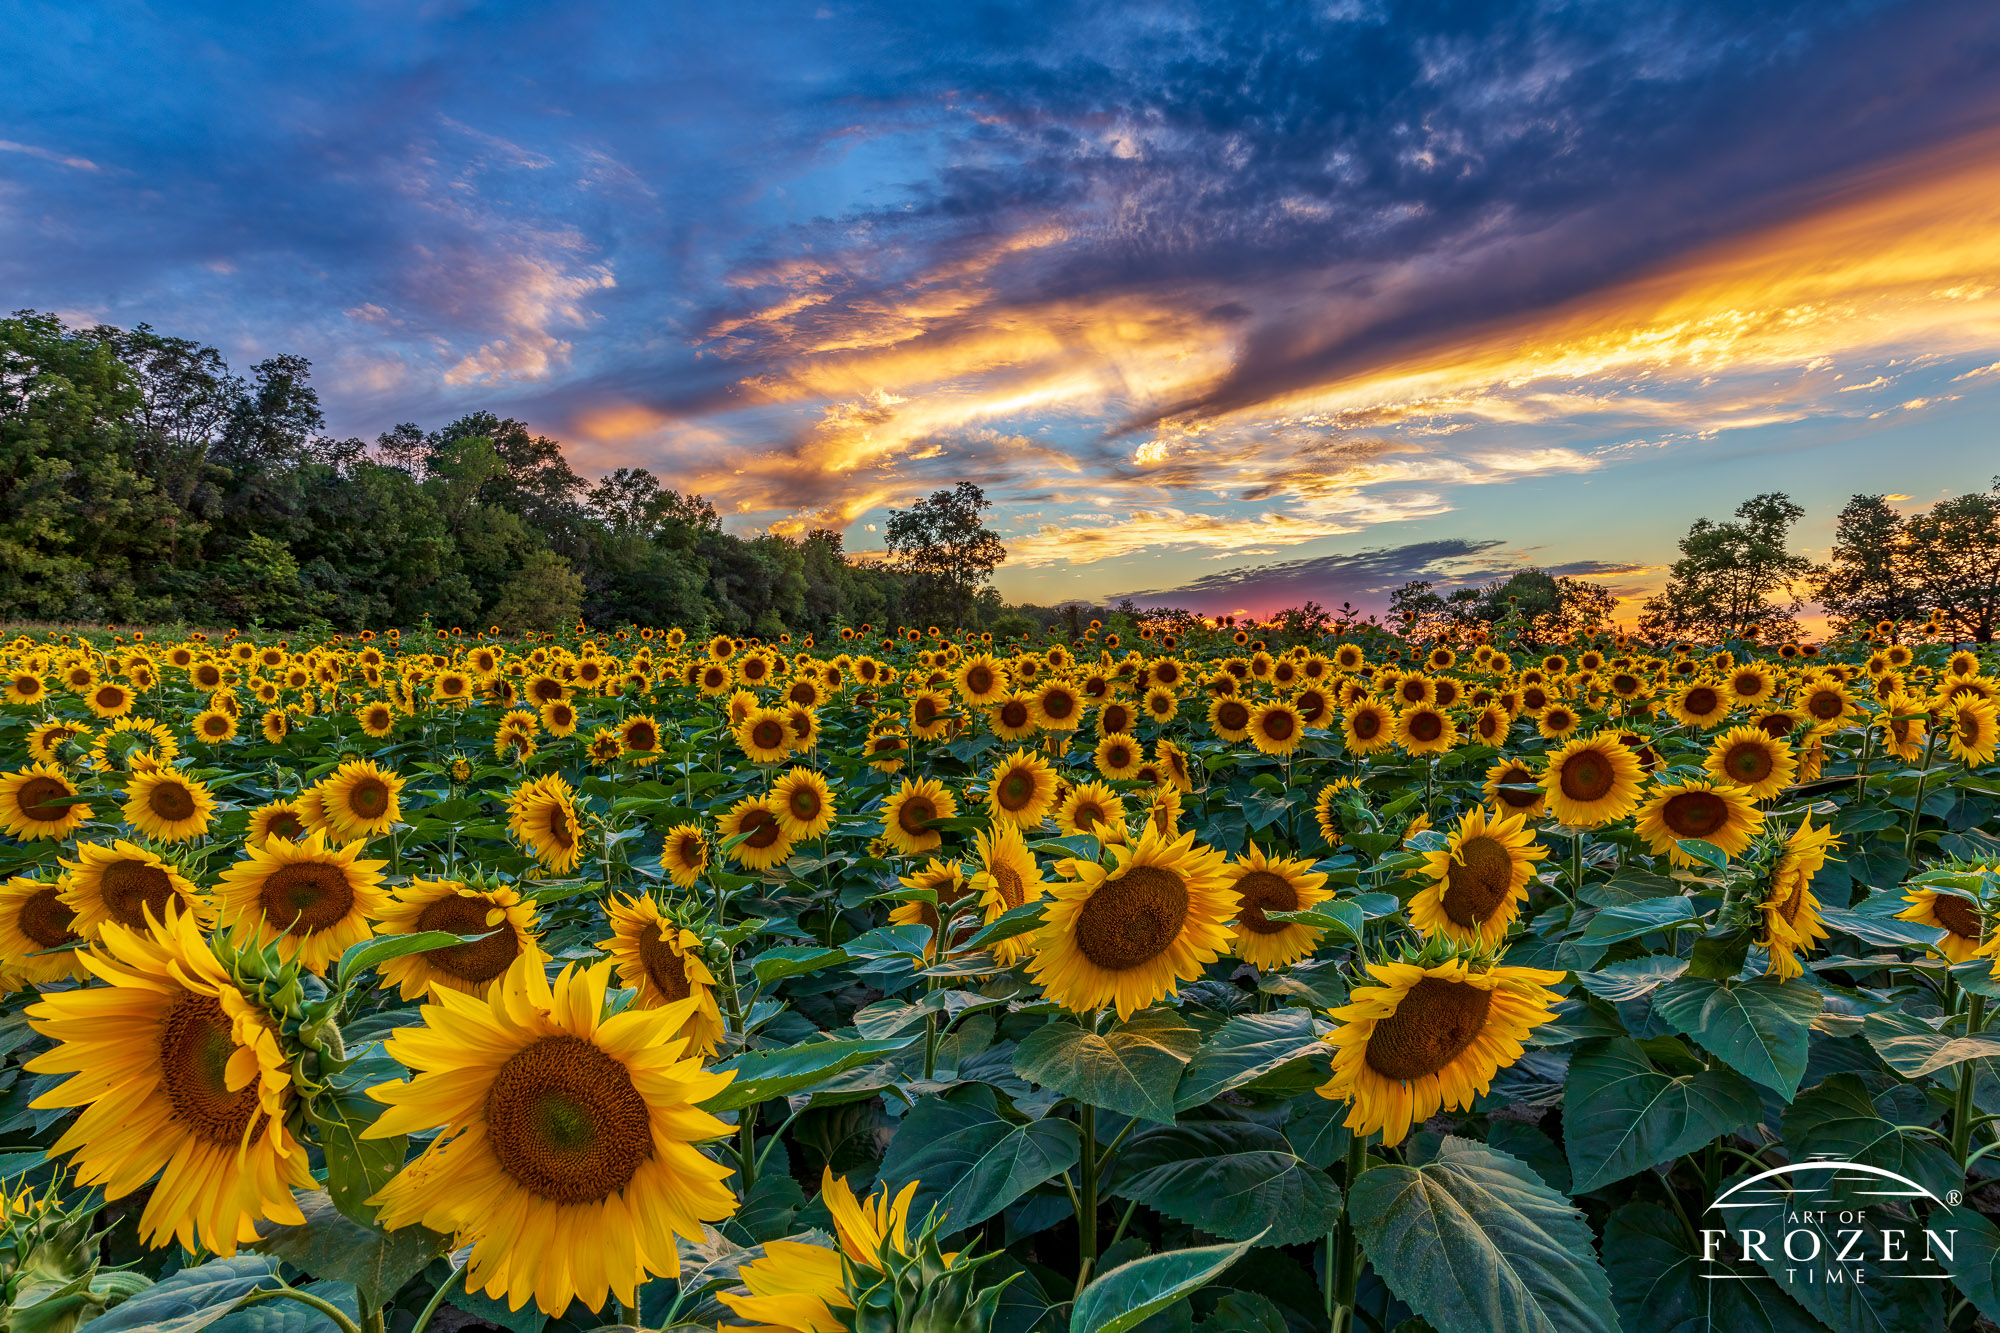 A sunflower field at twilight where a gentle camera flash warmly illuminated the flowers that contrast with the blues of the oncoming twilight skies